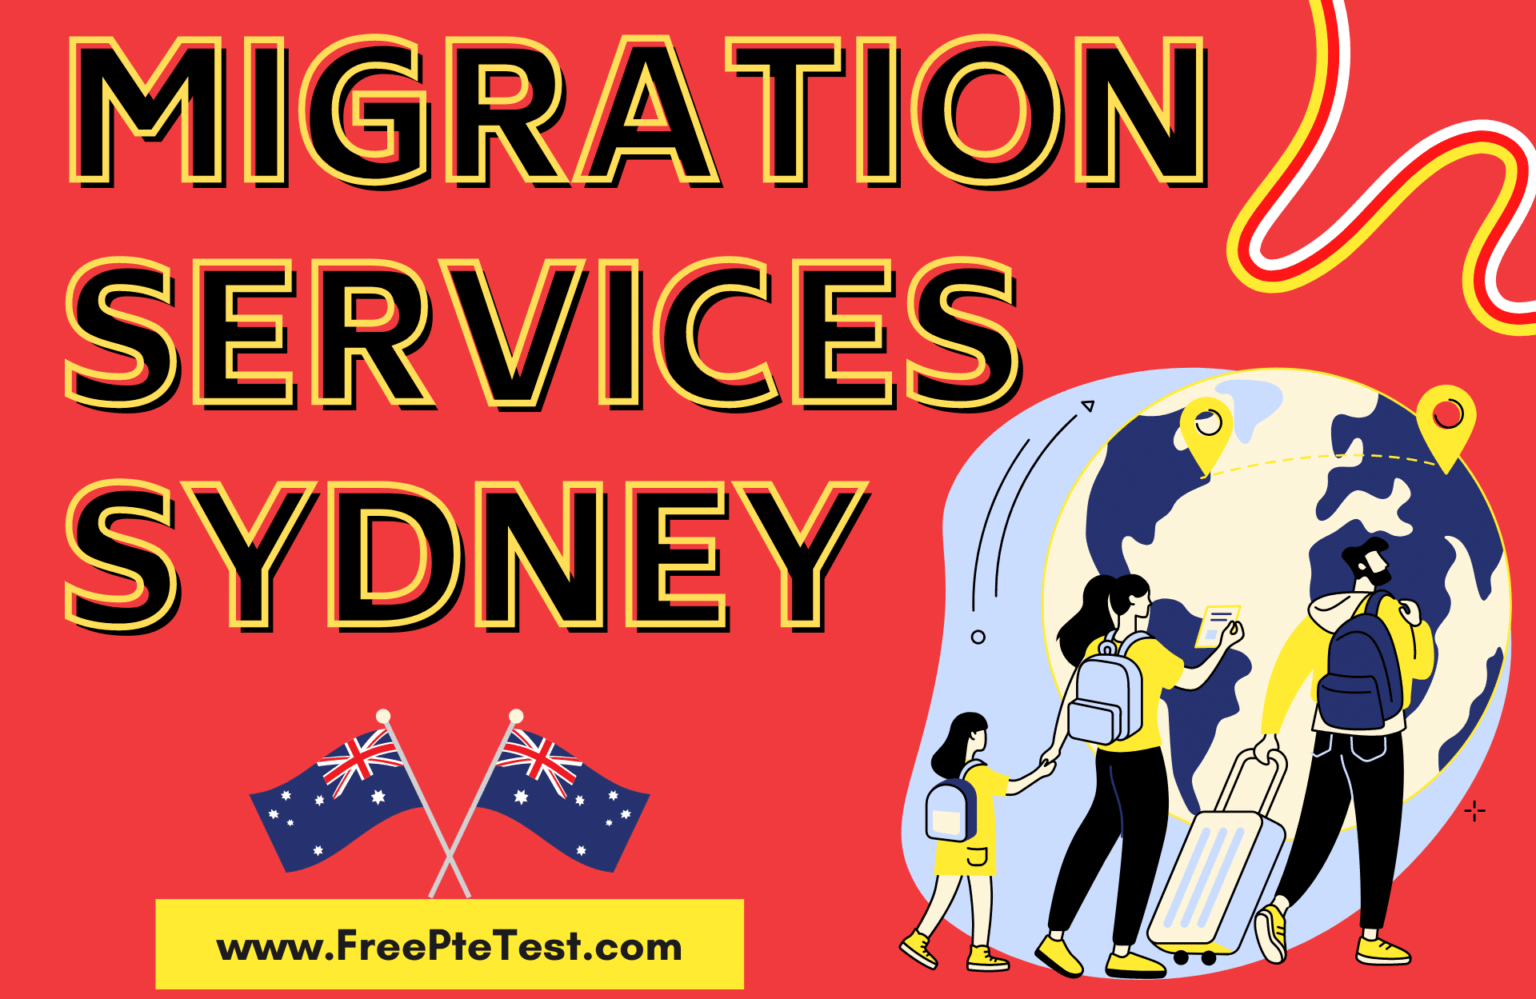 How to find Good Migration Services Sydney